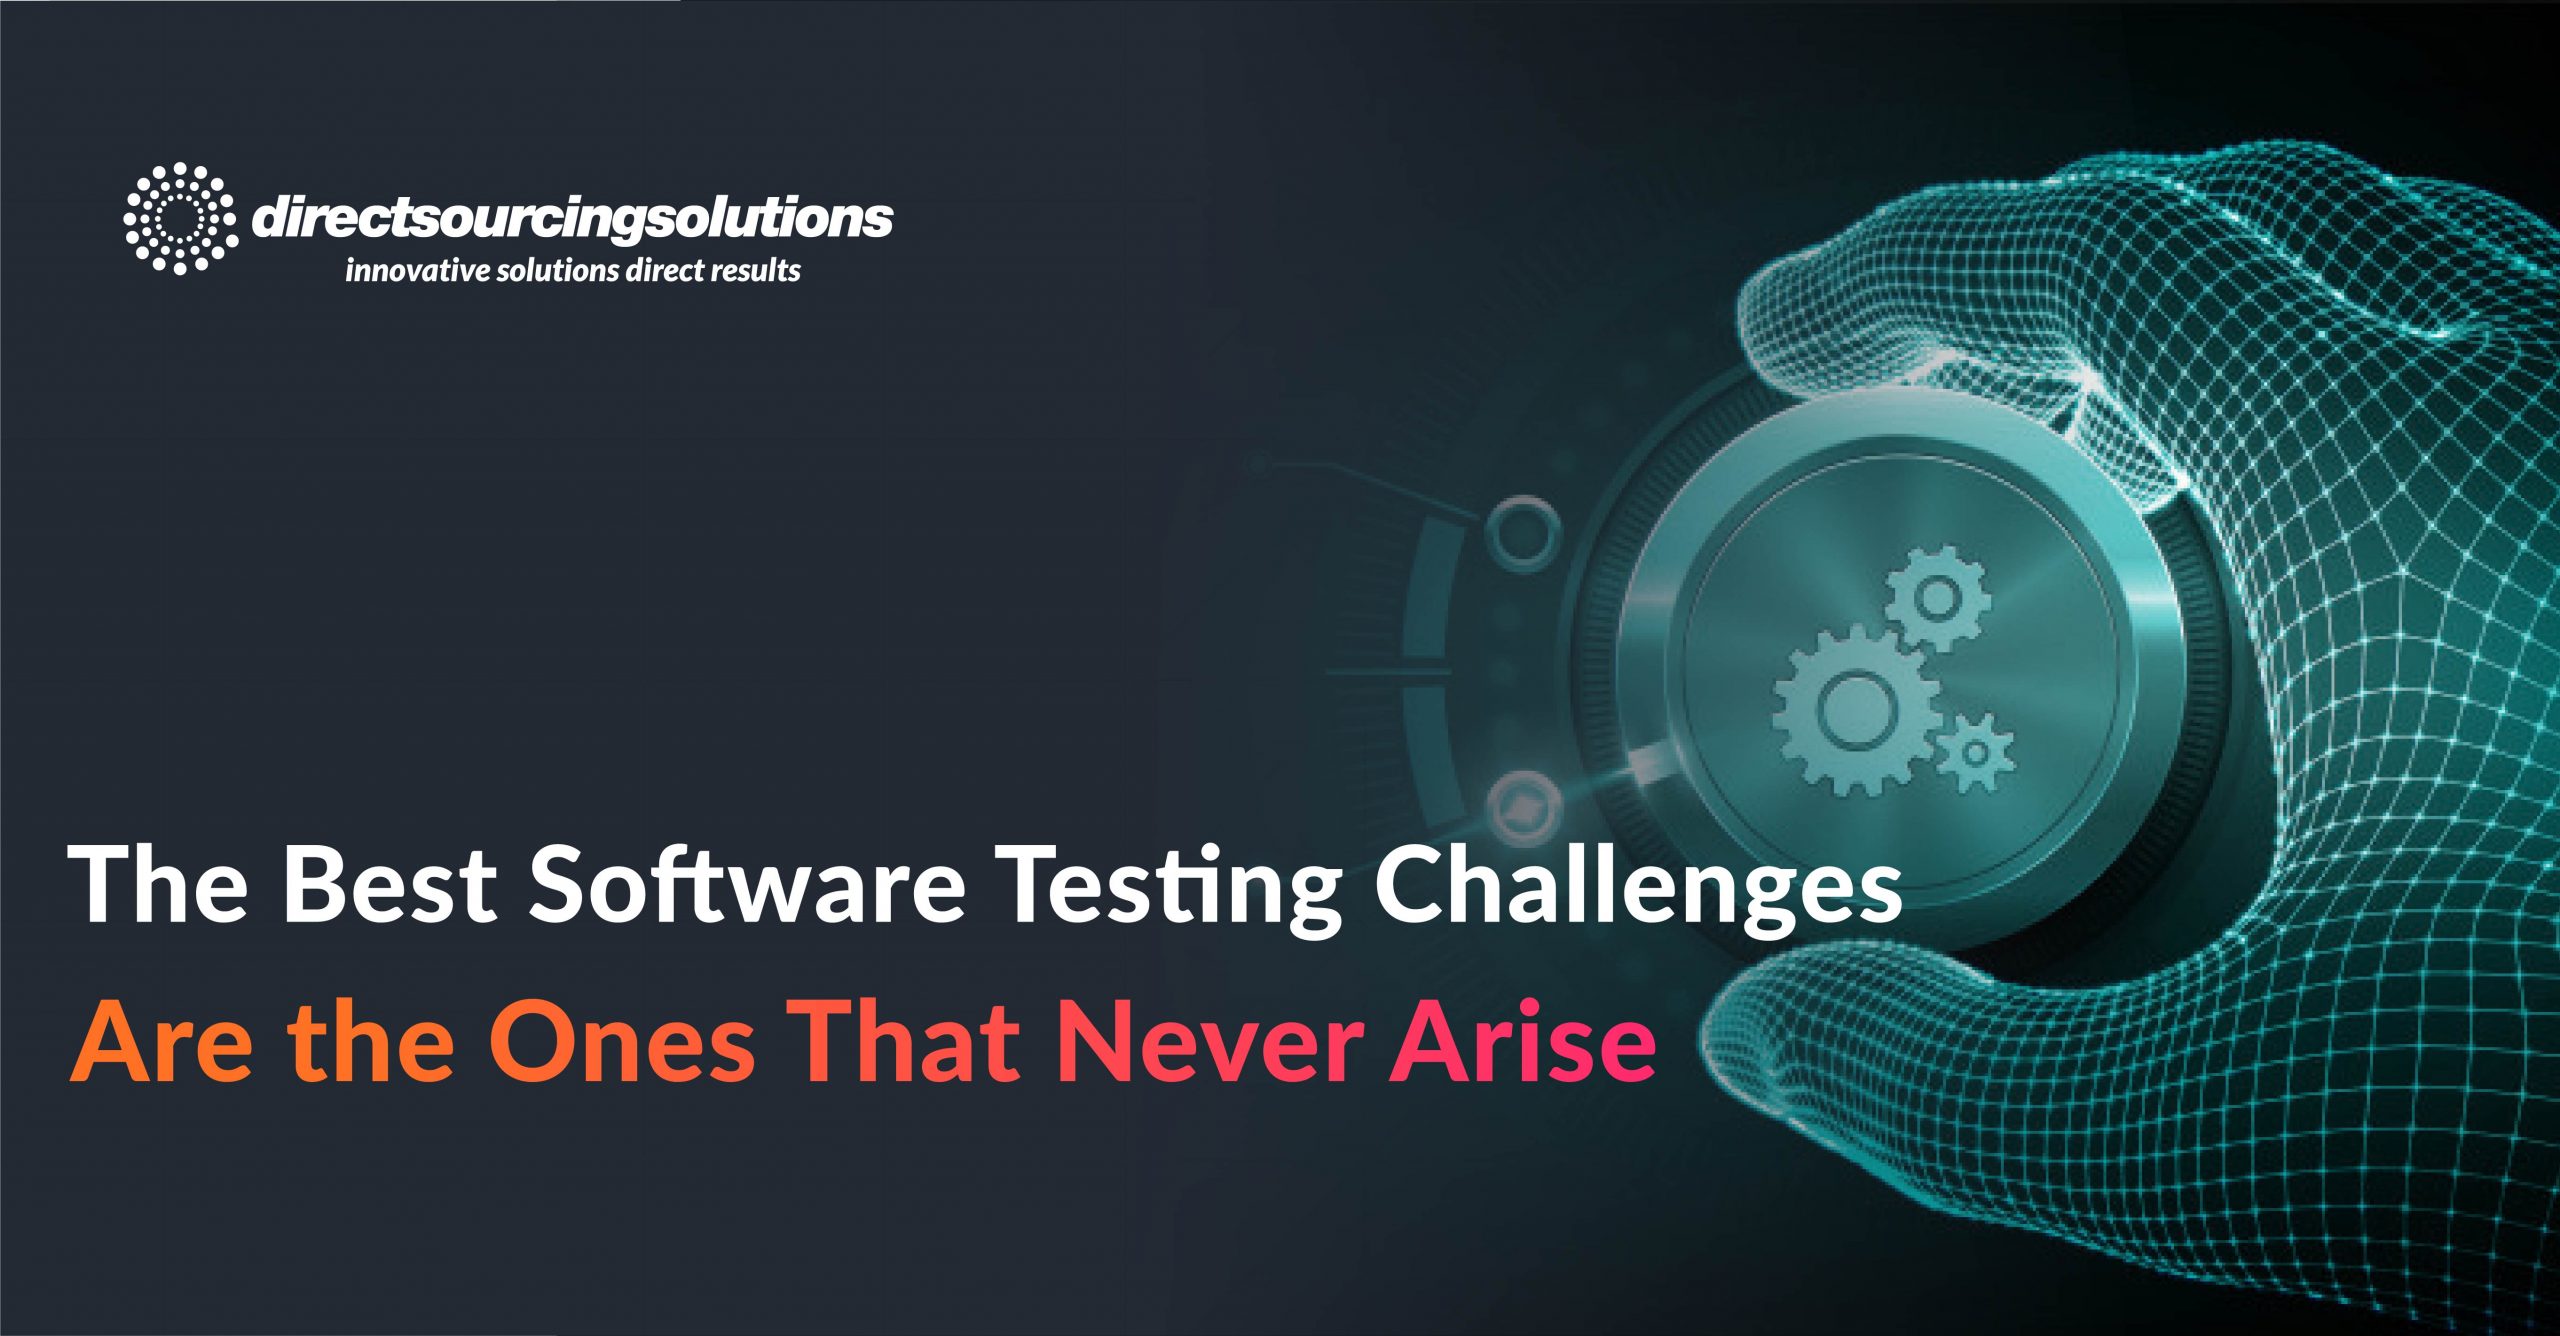 The Best Software Testing Challenges Are the Ones That Never Arise